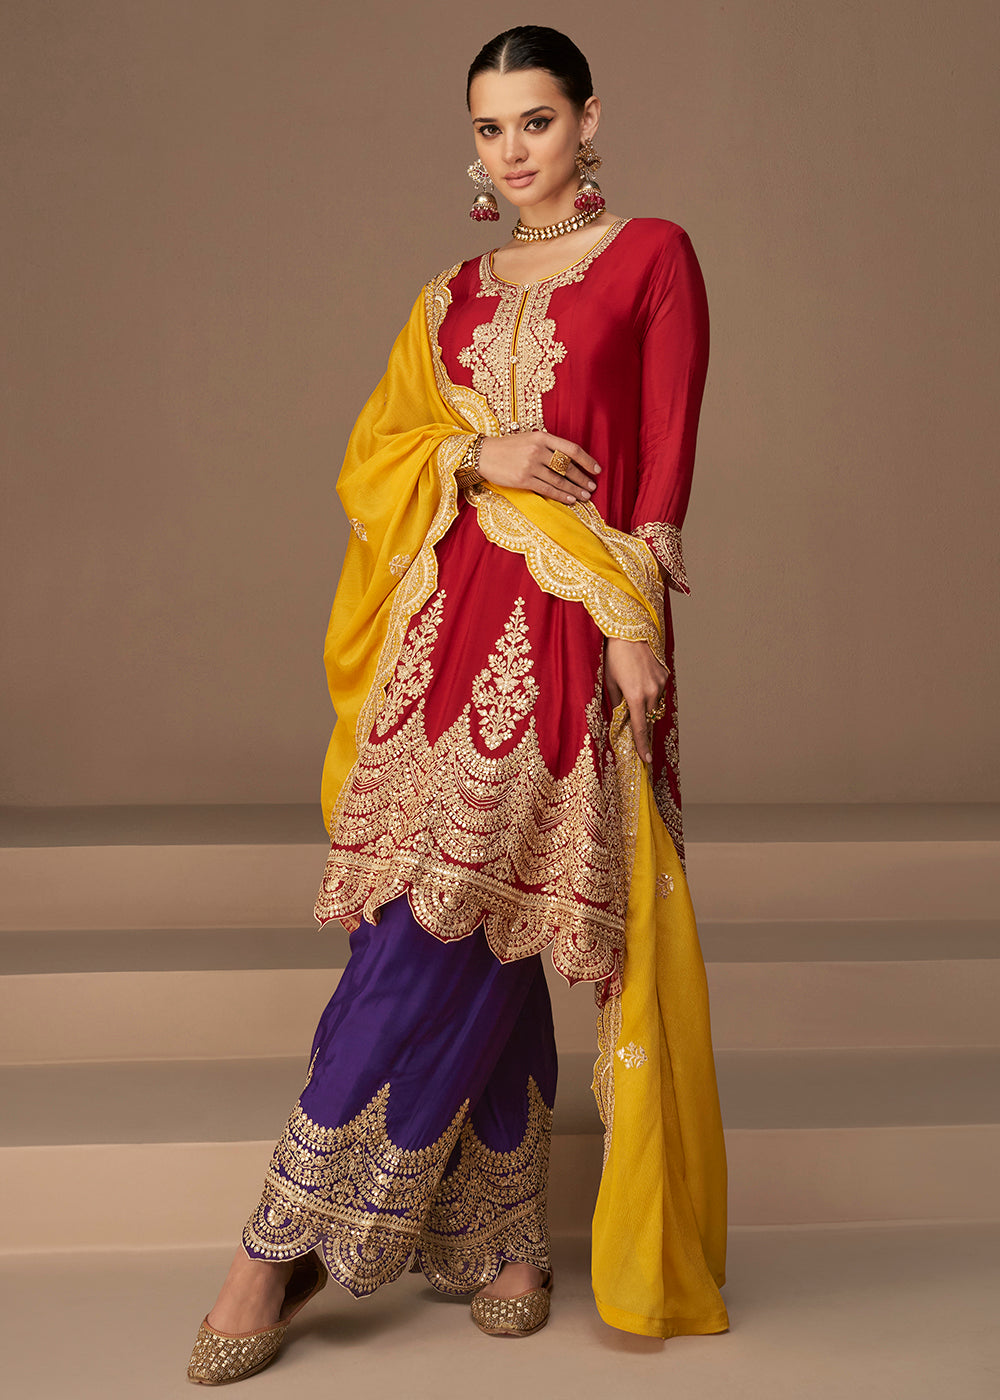 Buy Now Traditional Look Bright Red Chinon Silk Punjabi Style Suit Online in USA, UK, Canada, Germany, Australia & Worldwide at Empress Clothing.